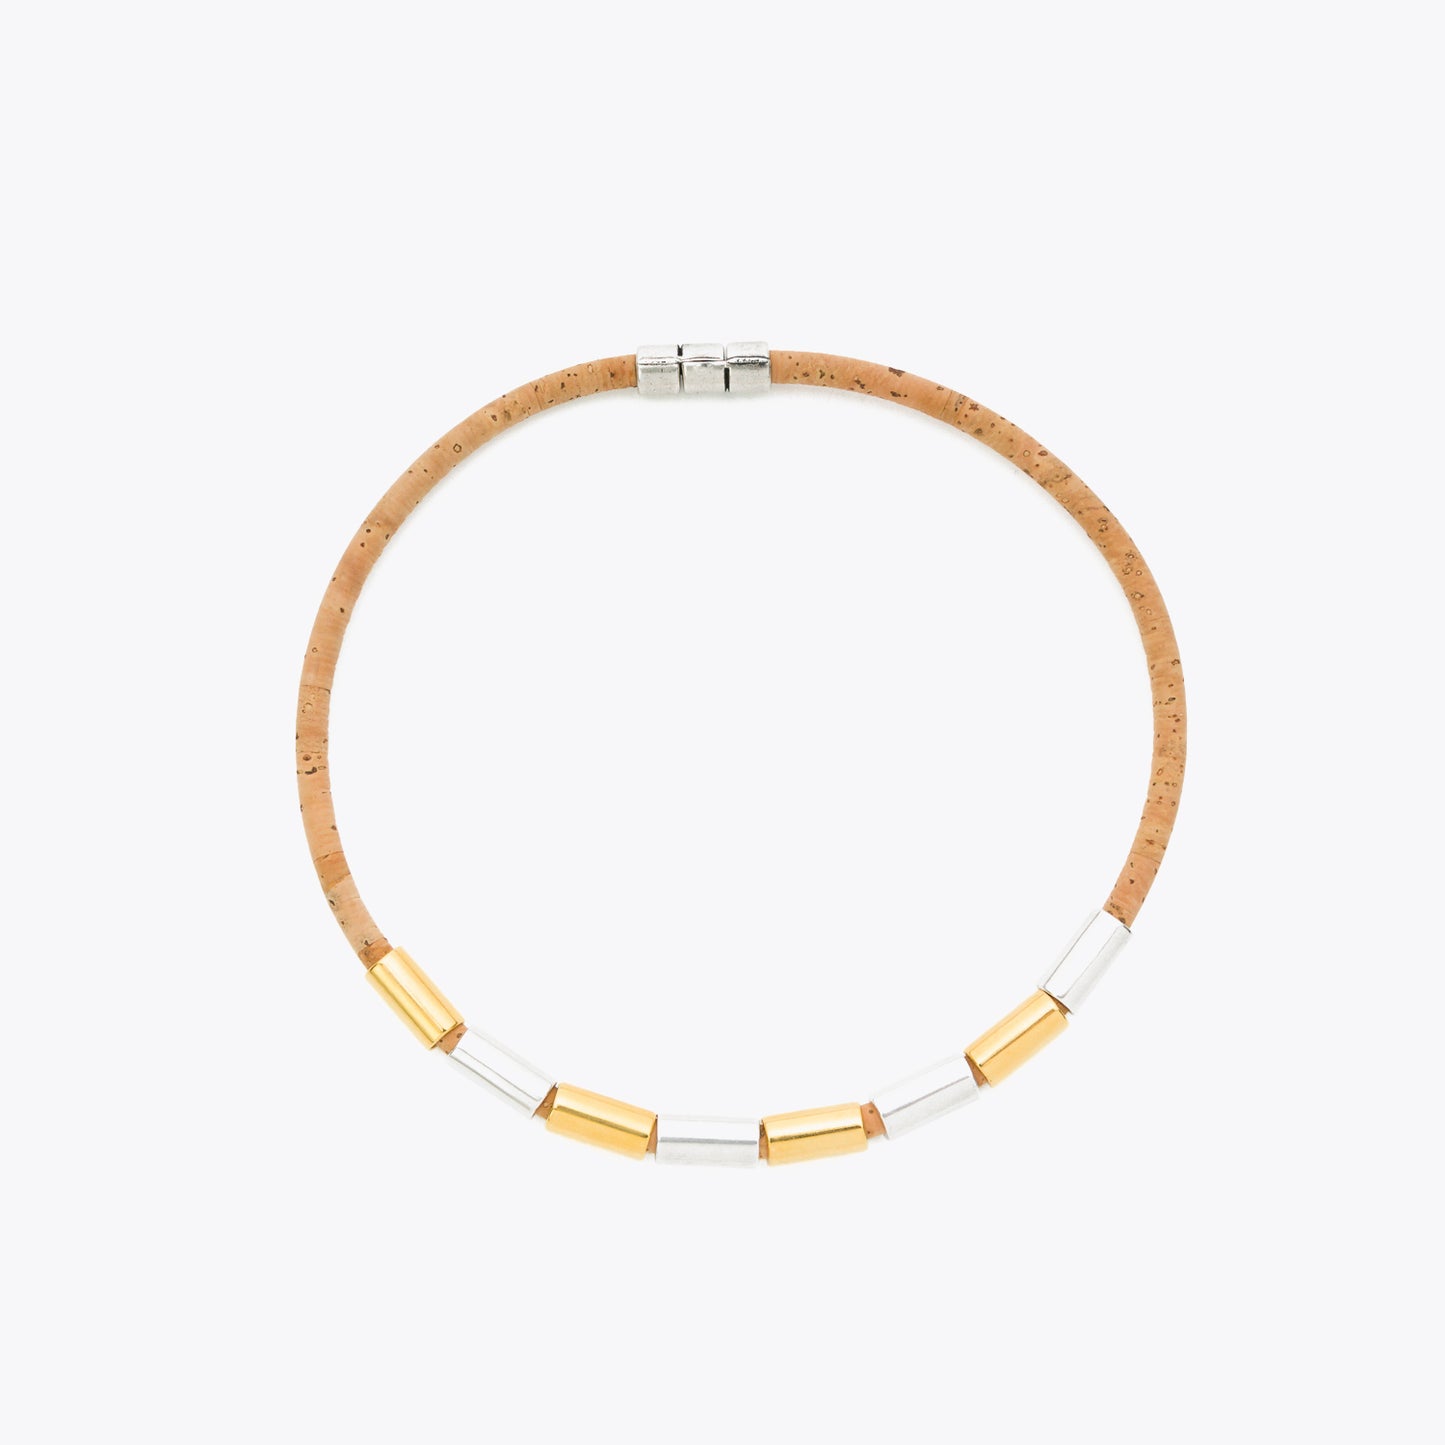 Artelusa Cork Necklace with Silver and Gold Tubes